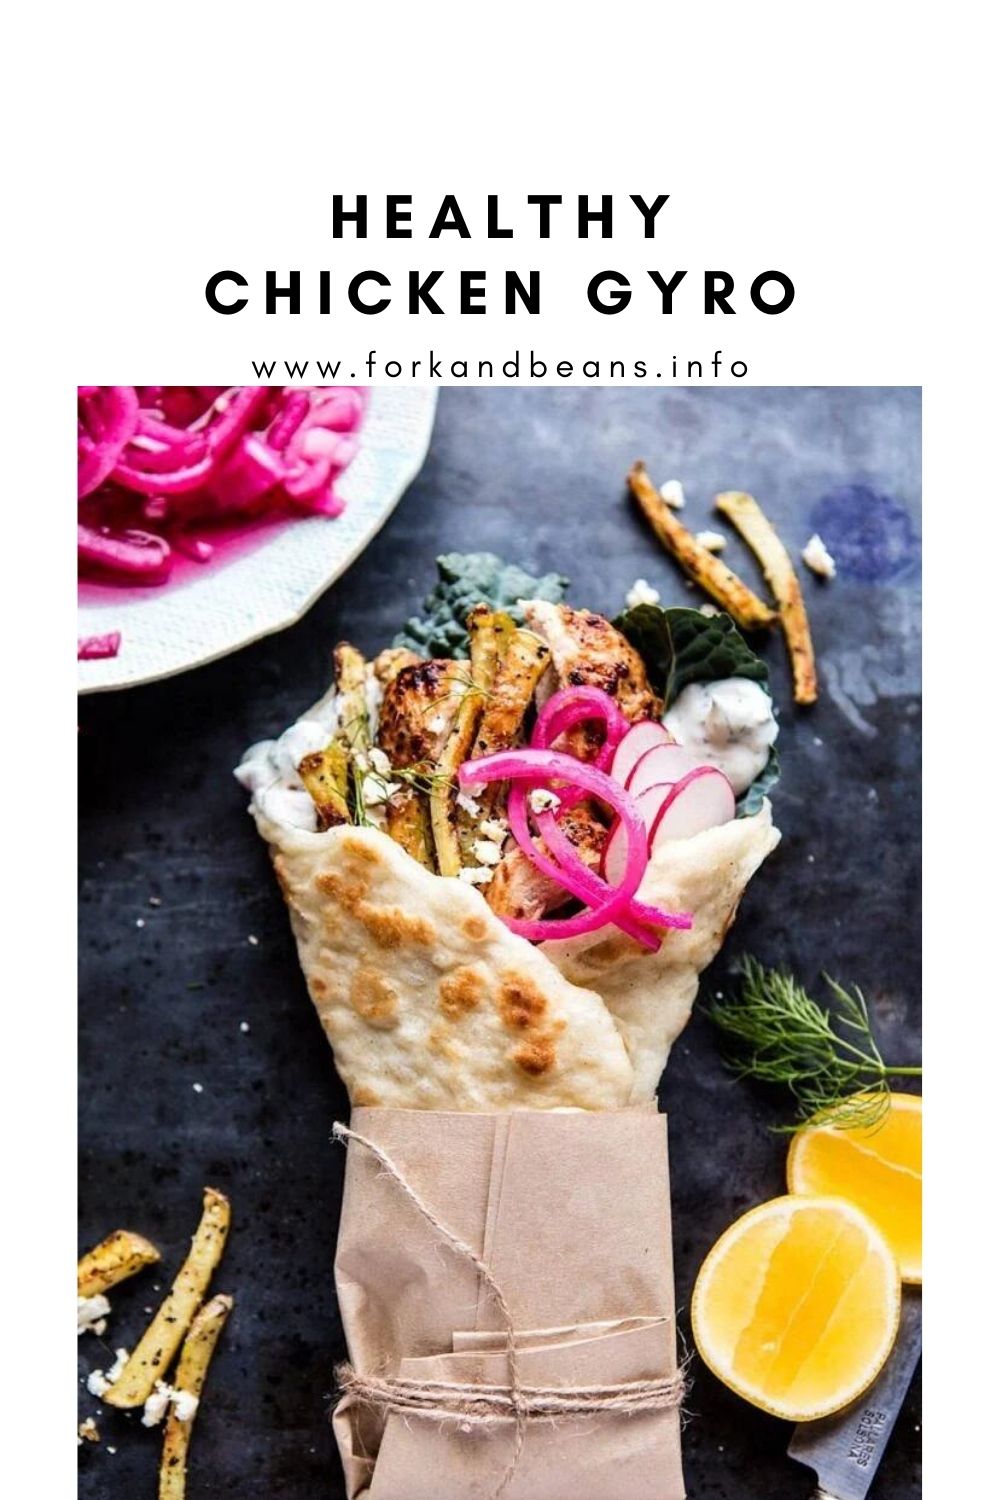 Roasted Chicken Gyros with Tzatziki and Feta Fries.